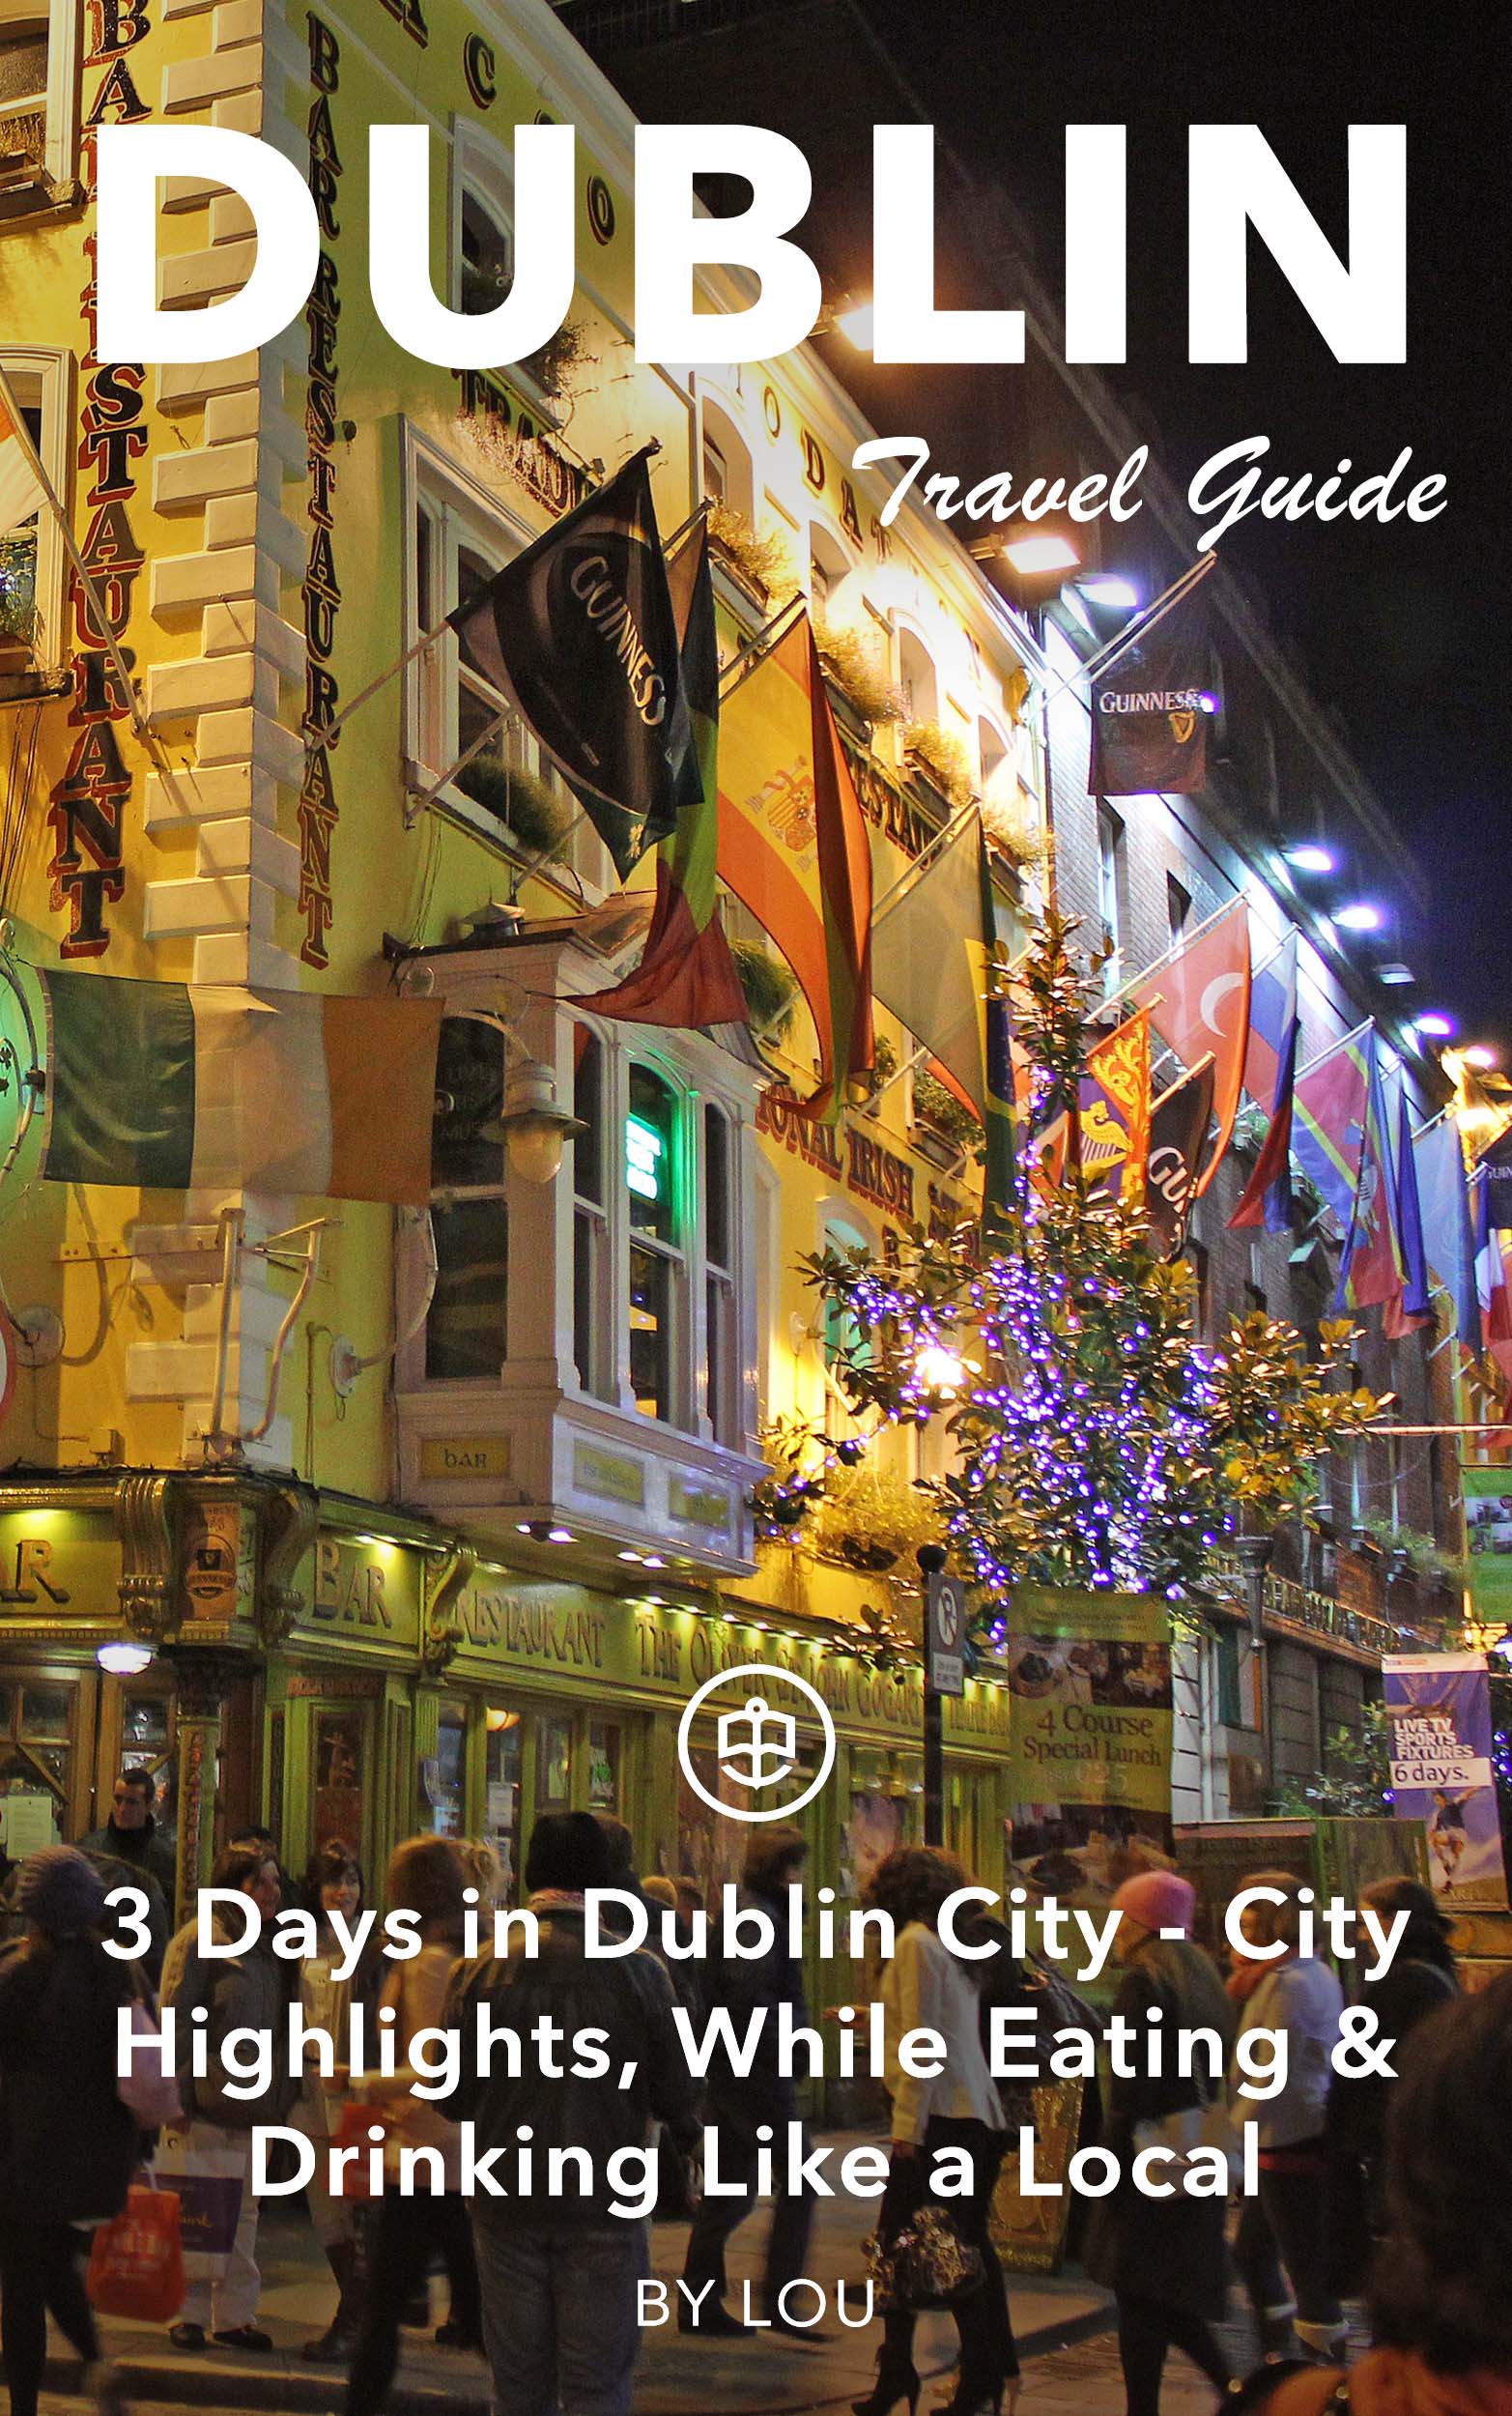 3 Days in Dublin City - City Highlights, While Eating & Drinking Like a Local